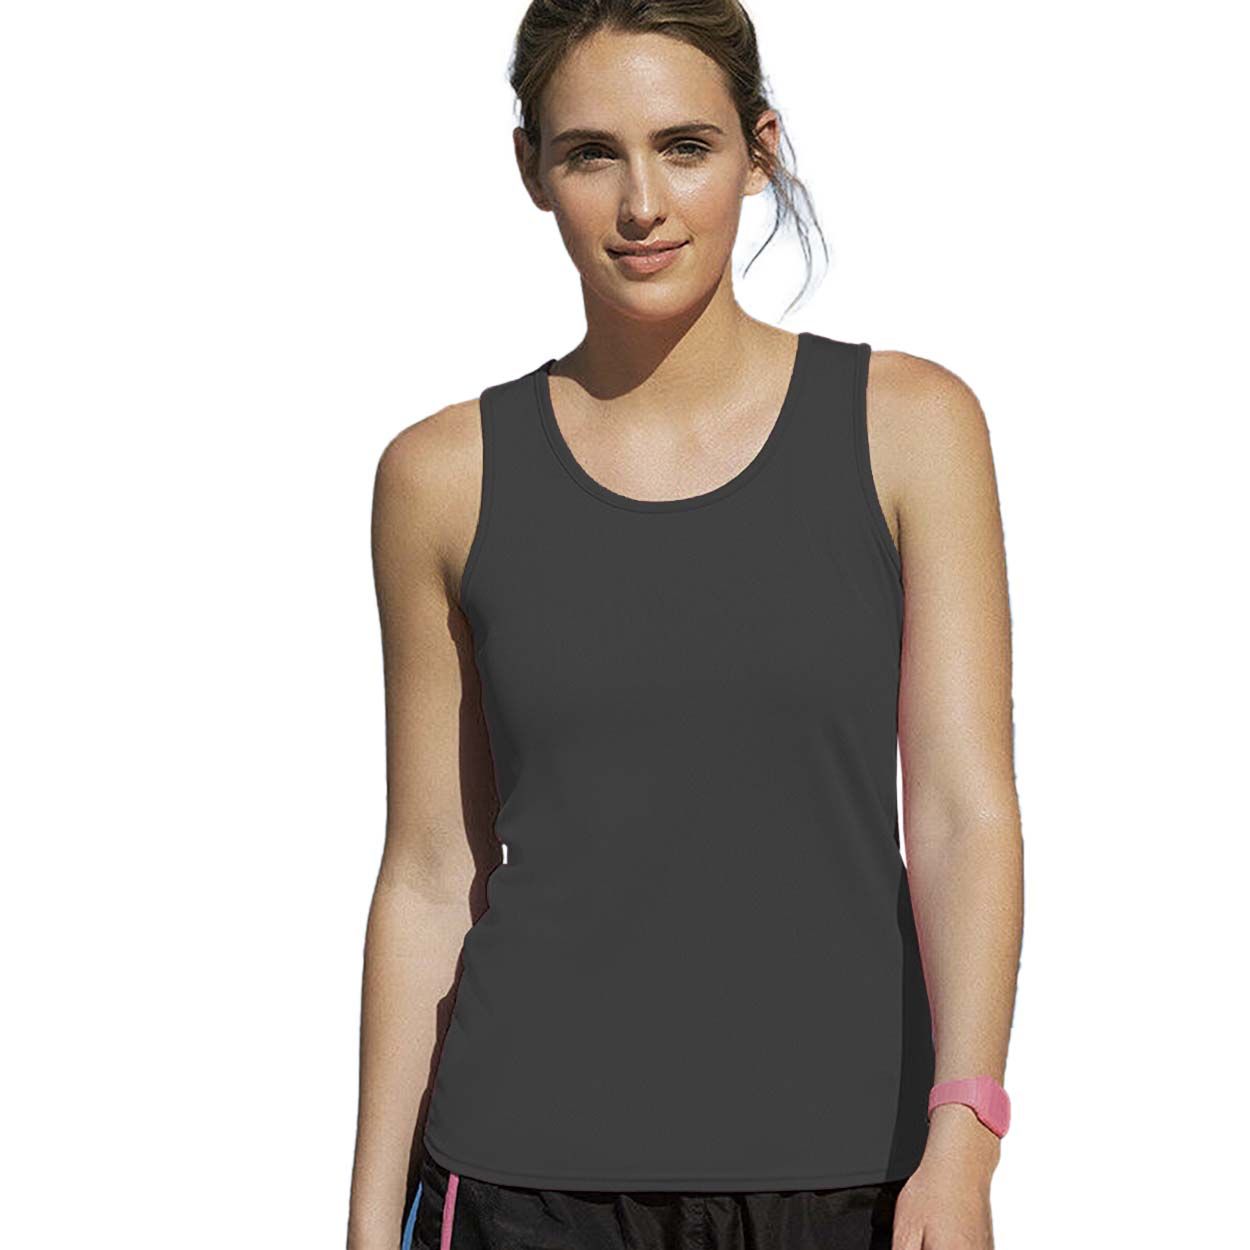 Moisture wicking fabric for quick drying performance. Shaped side seams for a feminine fit. Racer back styling. Self-fabric binding to neck and armholes. Printed back neck label for comfort. Machine washable. Fabric: 100% Polyester. Weight: 140gsm. Size: XS- 8, S- 10, M- 12, L- 14, XL- 16, 2XL- 18.